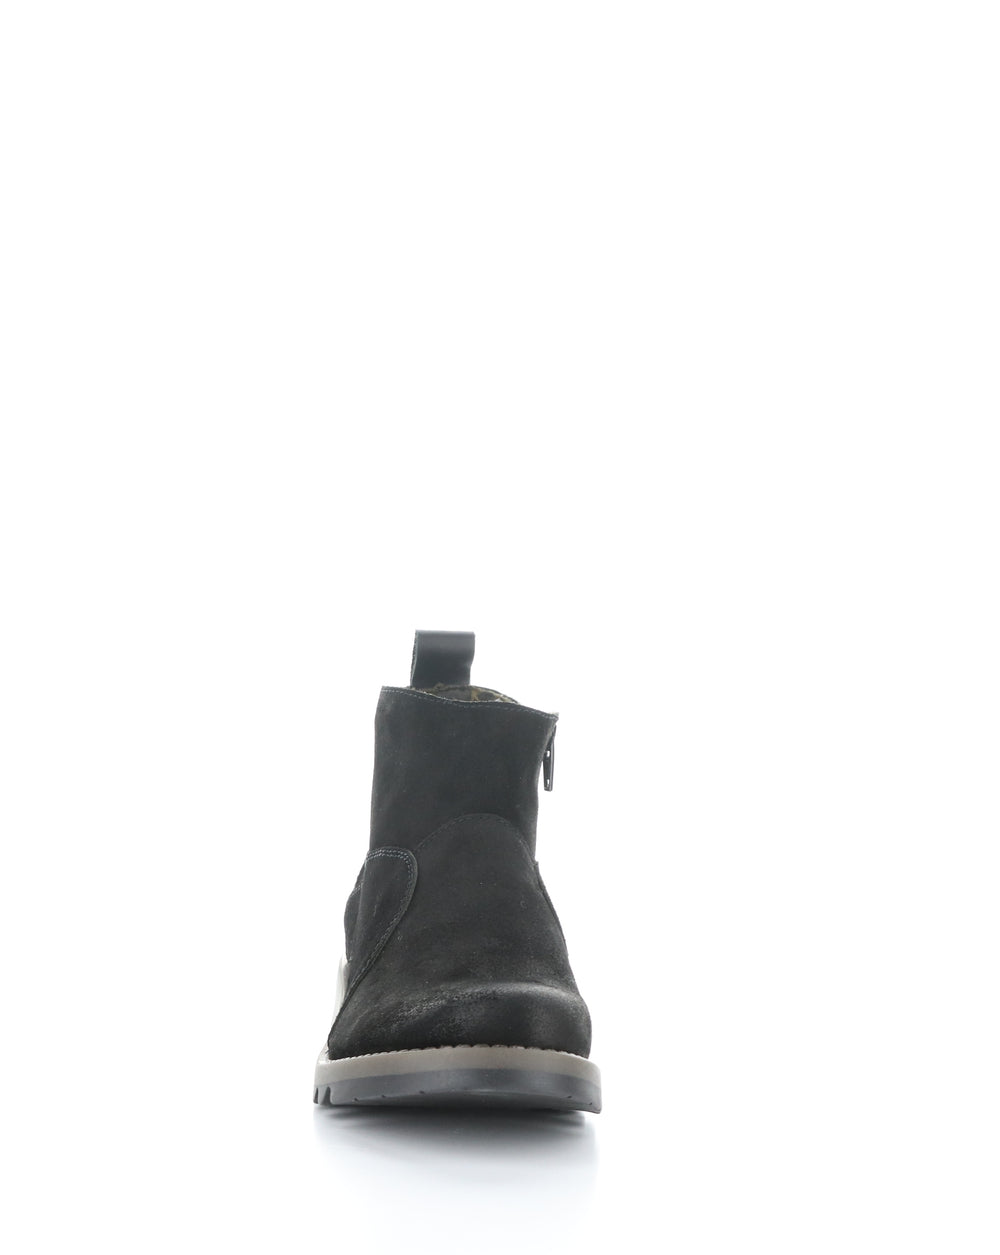 SELY918FLY 004 BLACK Round Toe Boots